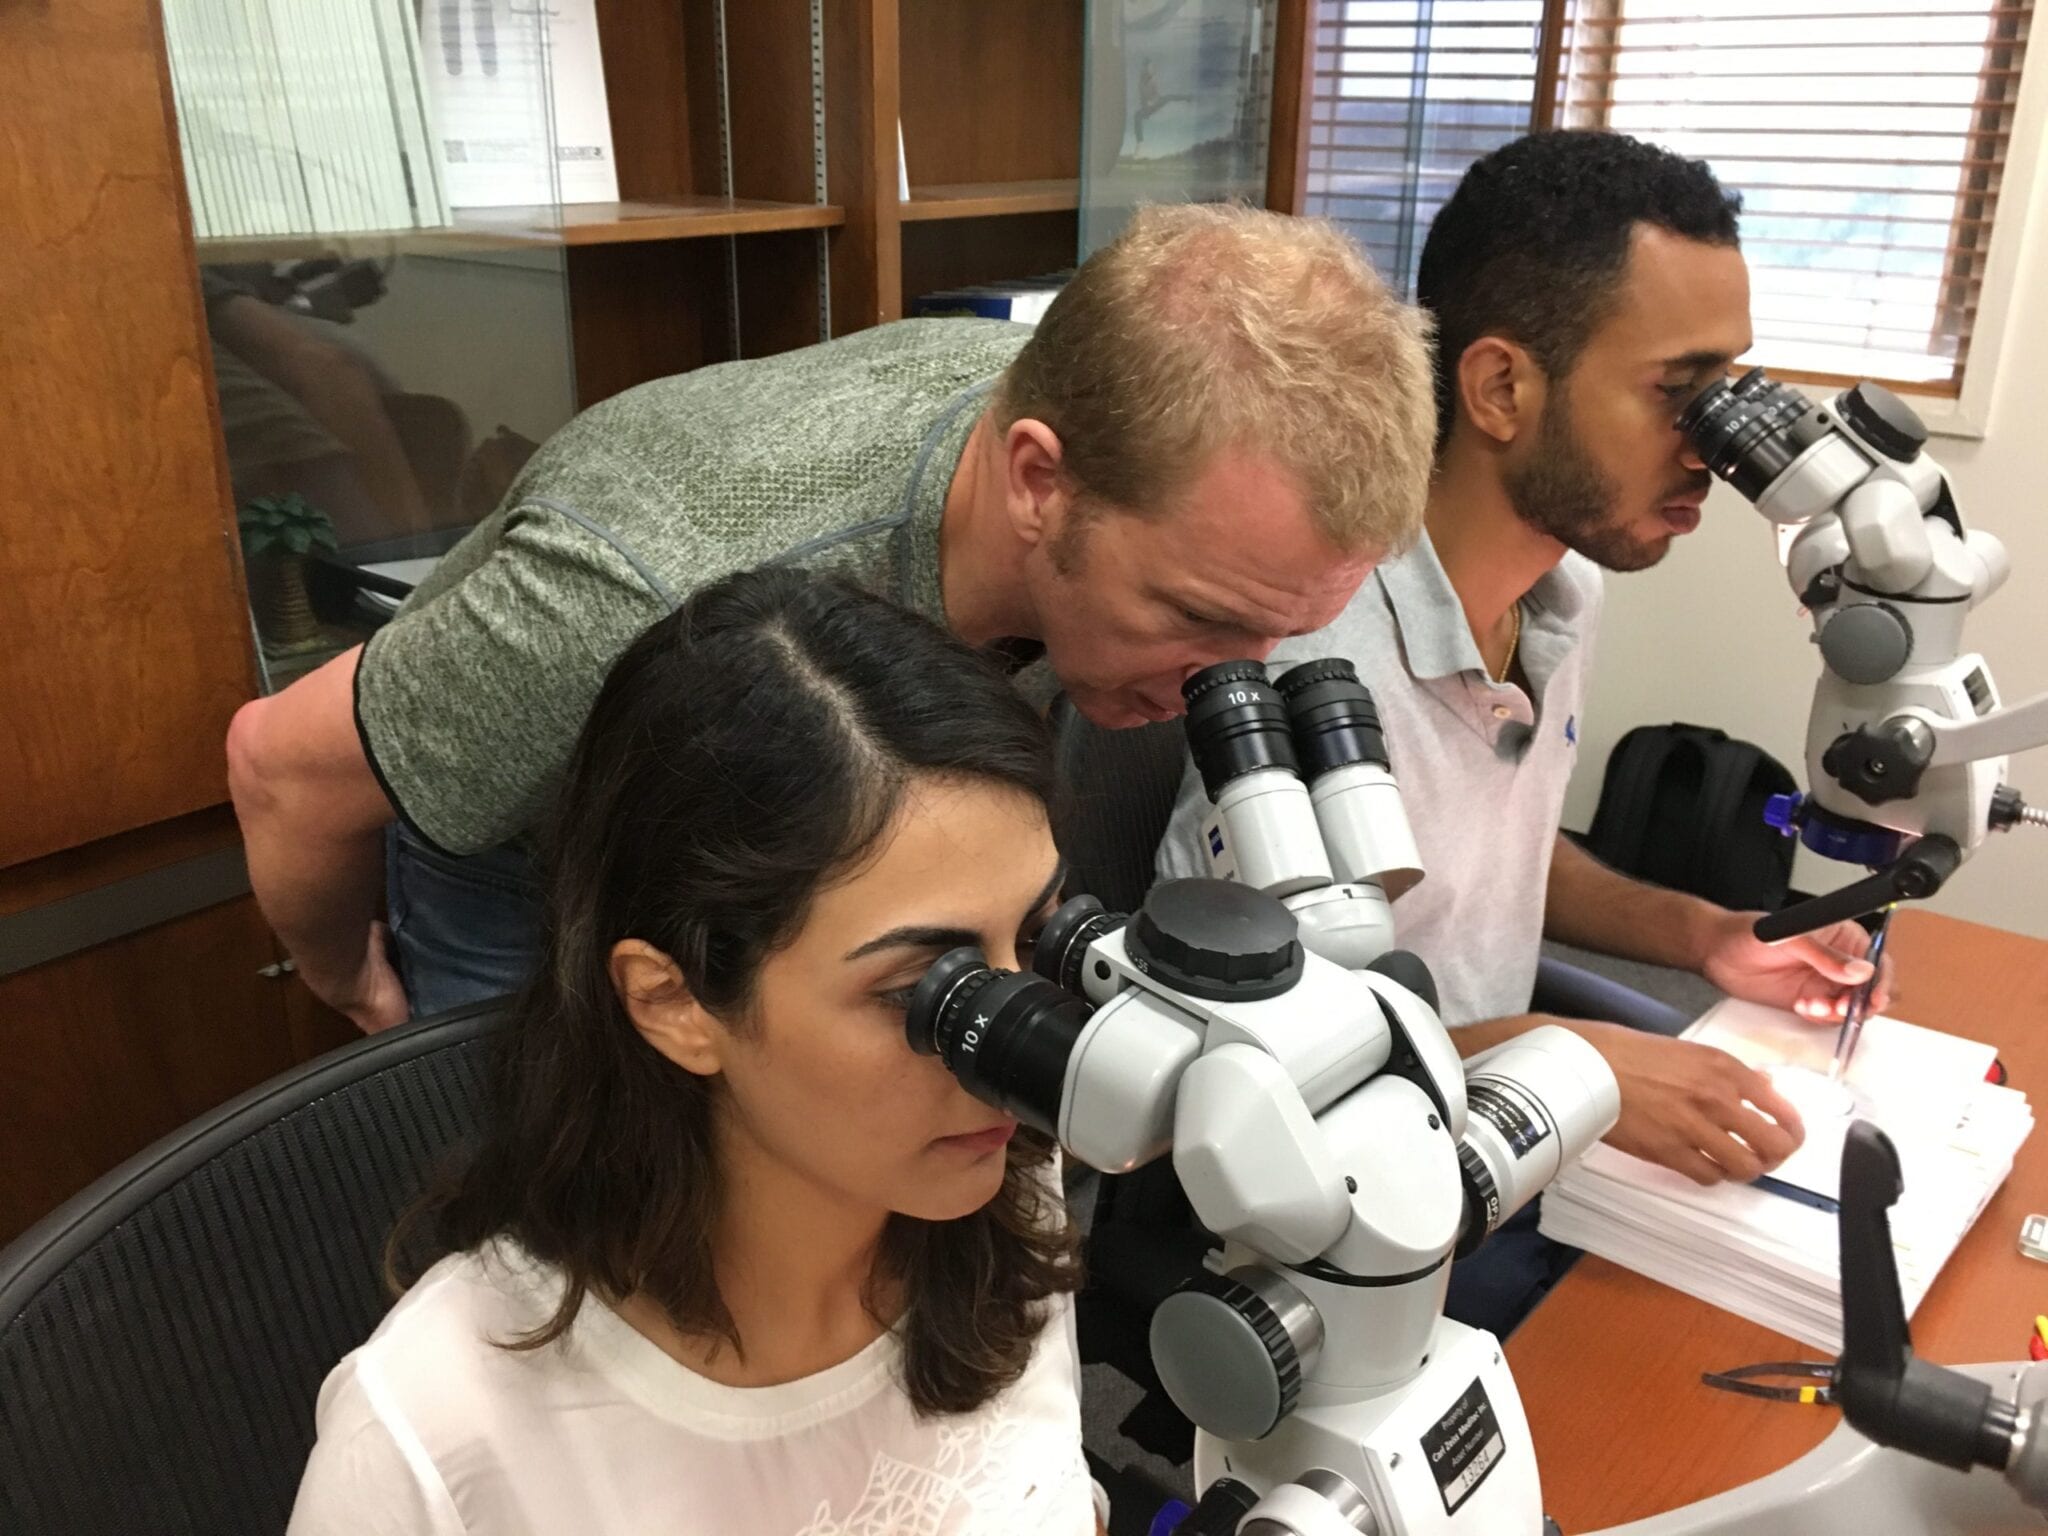 Dr. Cross Looking Through Microscope with Other Students